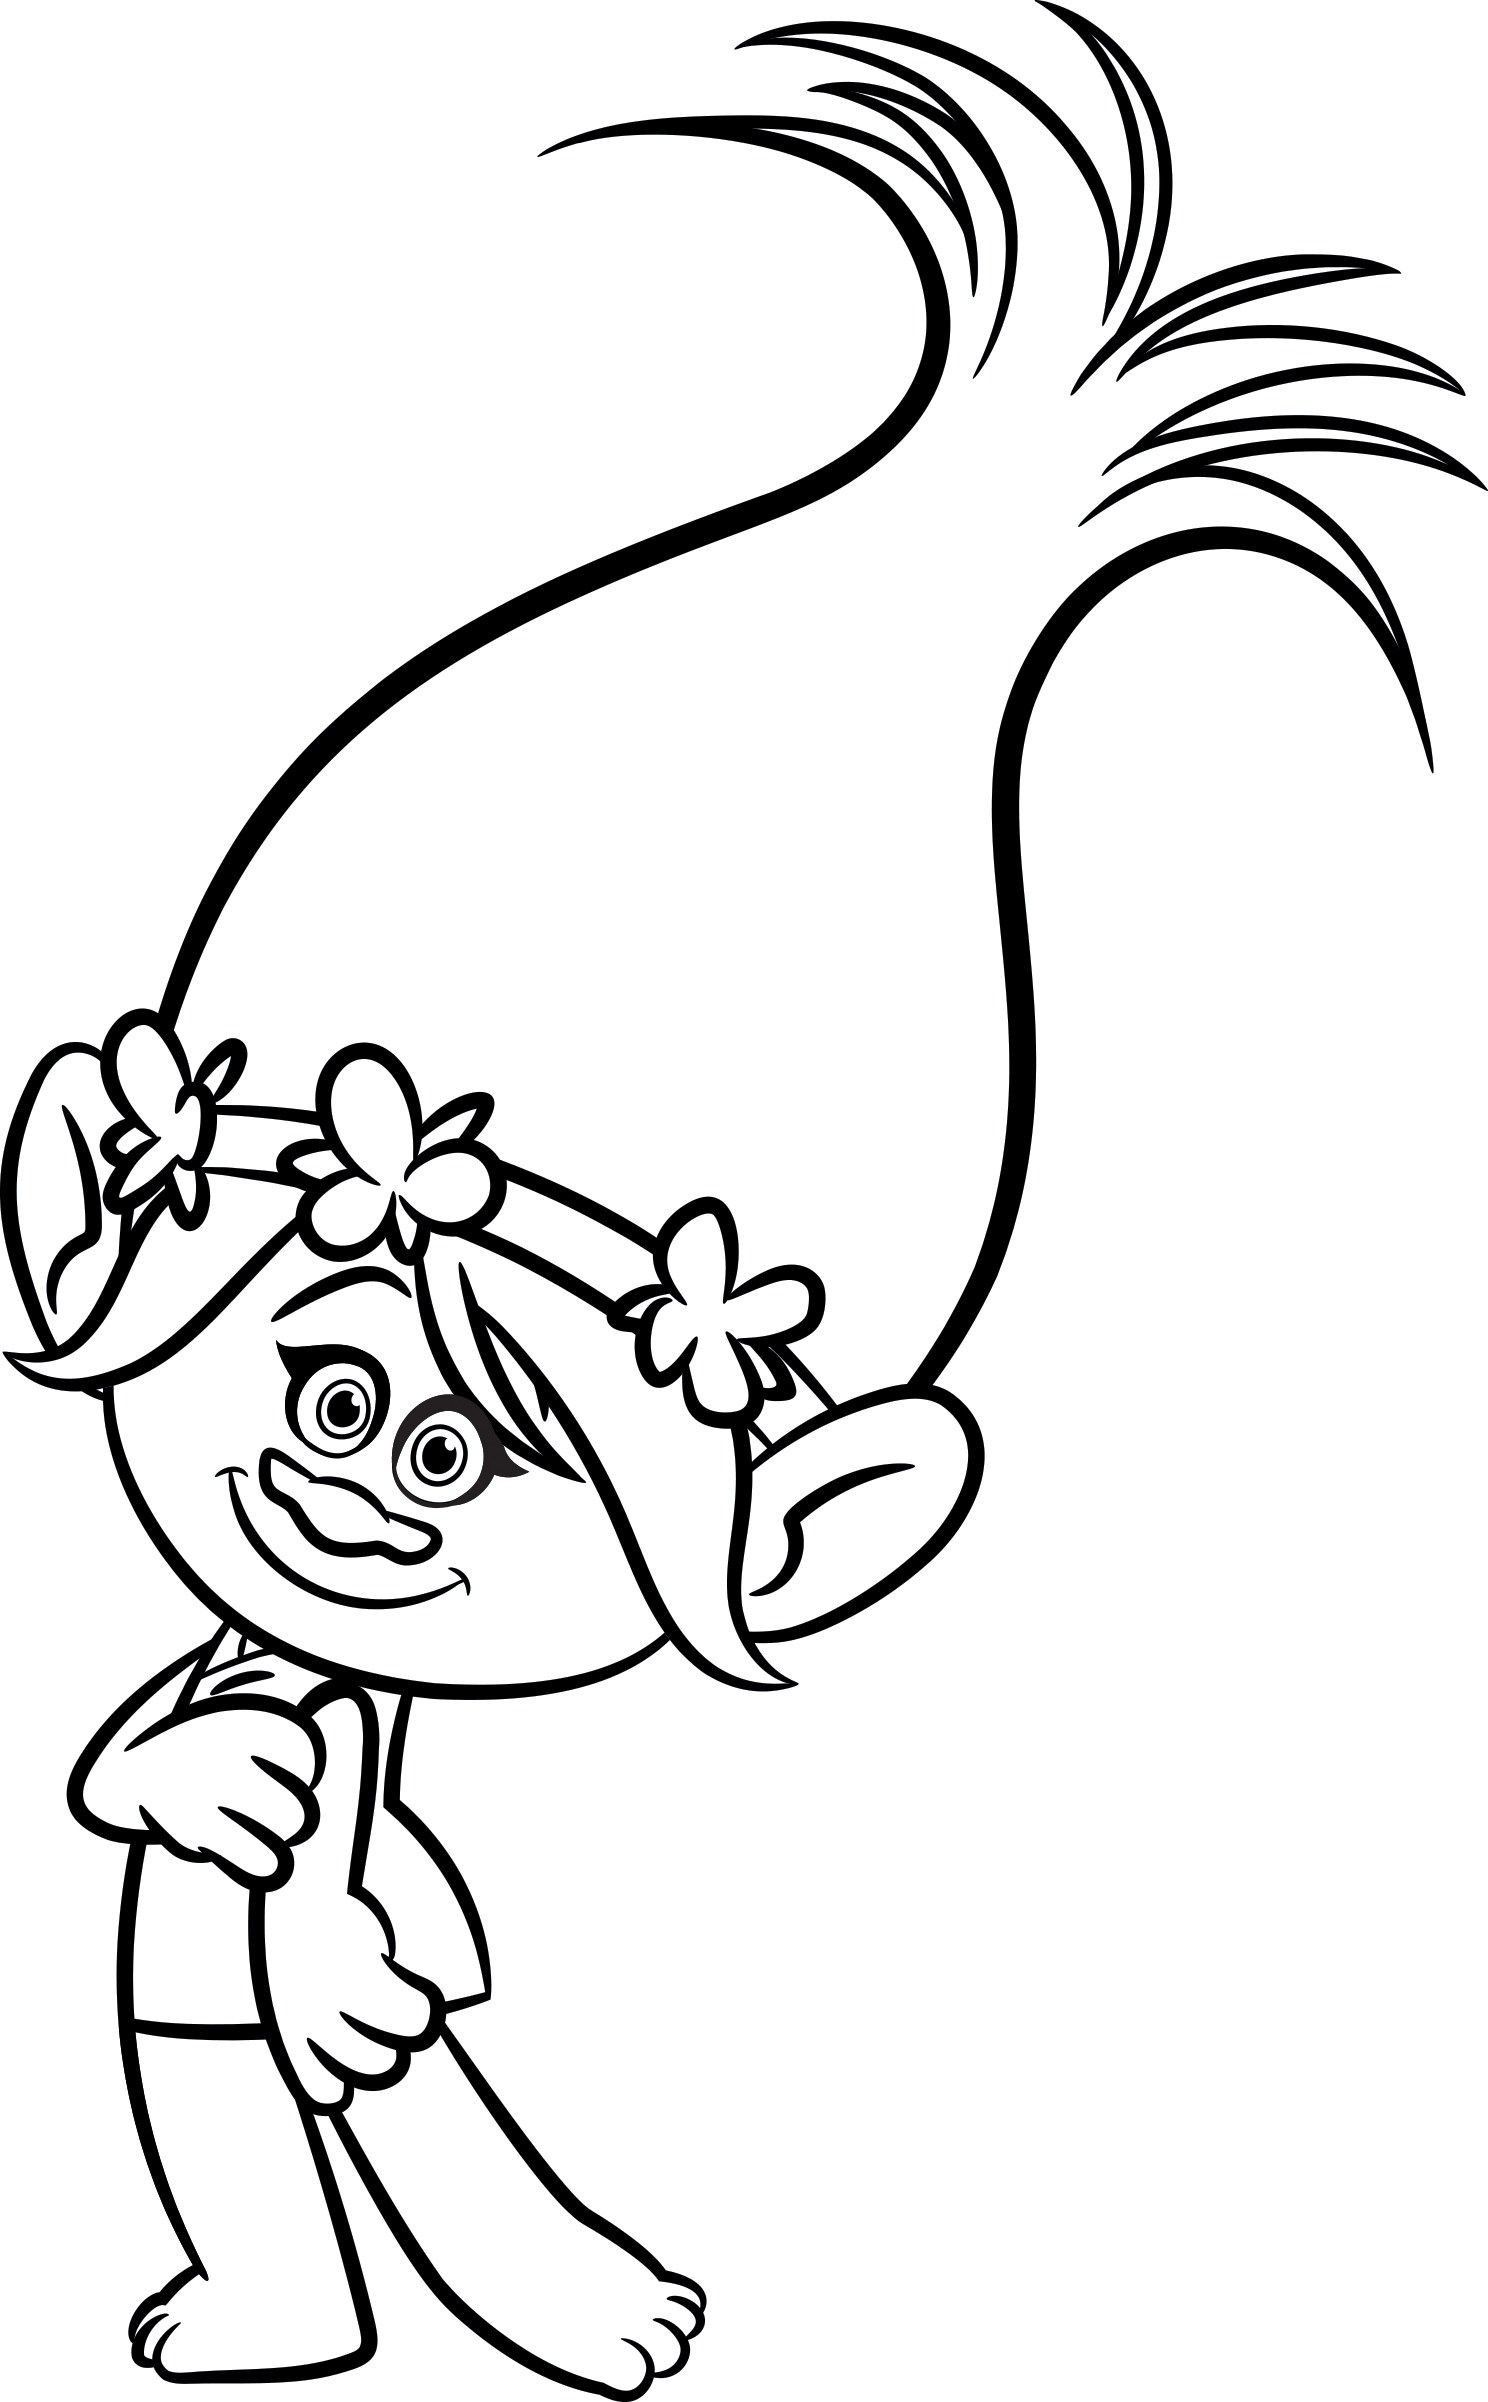 Princess Poppy Trolls Coloring Page – From the thousand pictures on the web  with regards to … | Poppy coloring page, Princess coloring pages, Cartoon coloring  pages